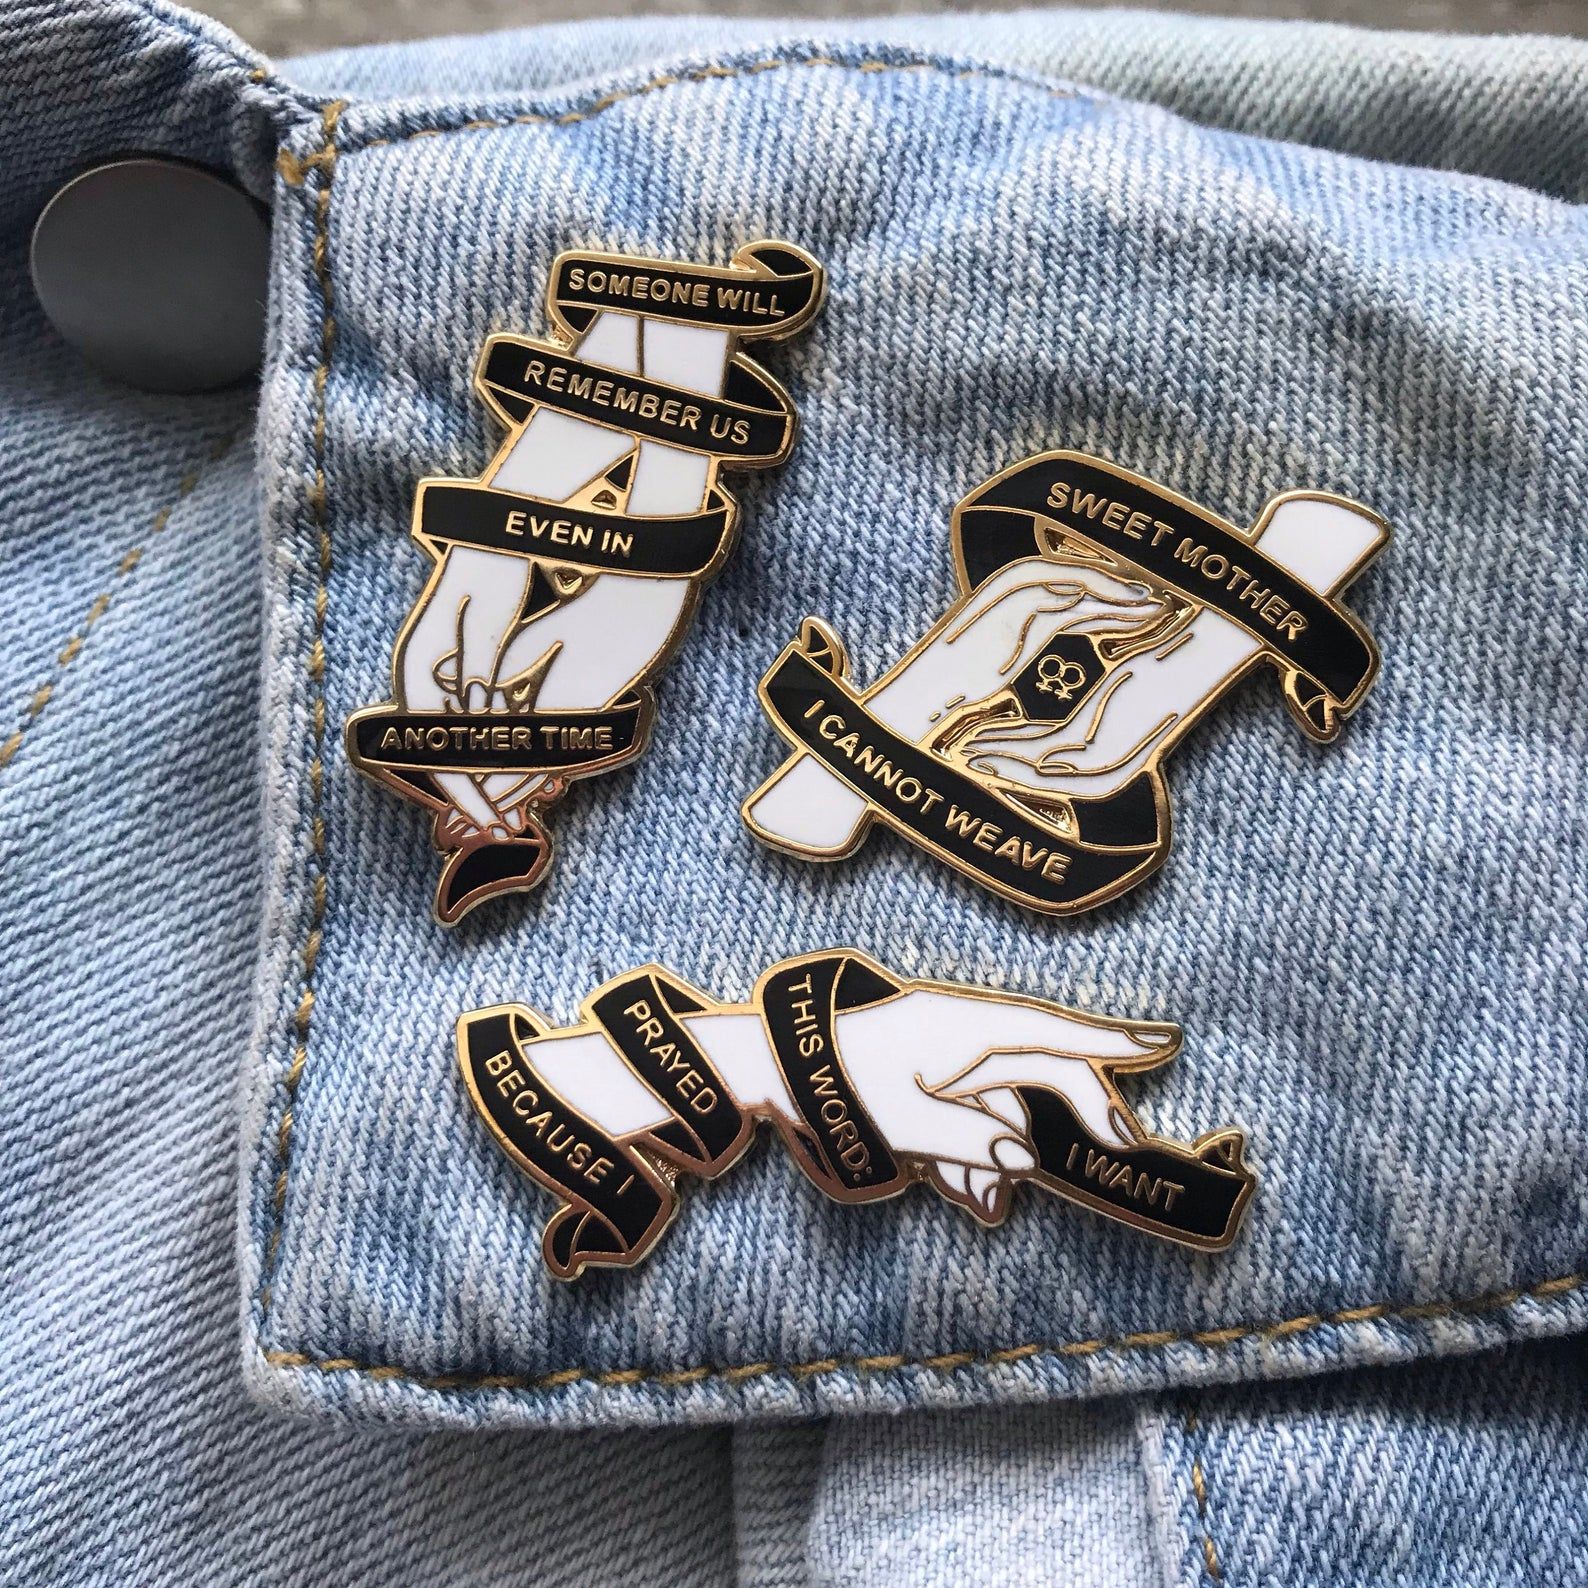 A set of three enamel pins on a denim jacket. The pins depict hands holding or reaching, with black ribbon running around them and lines from Sappho in gold.